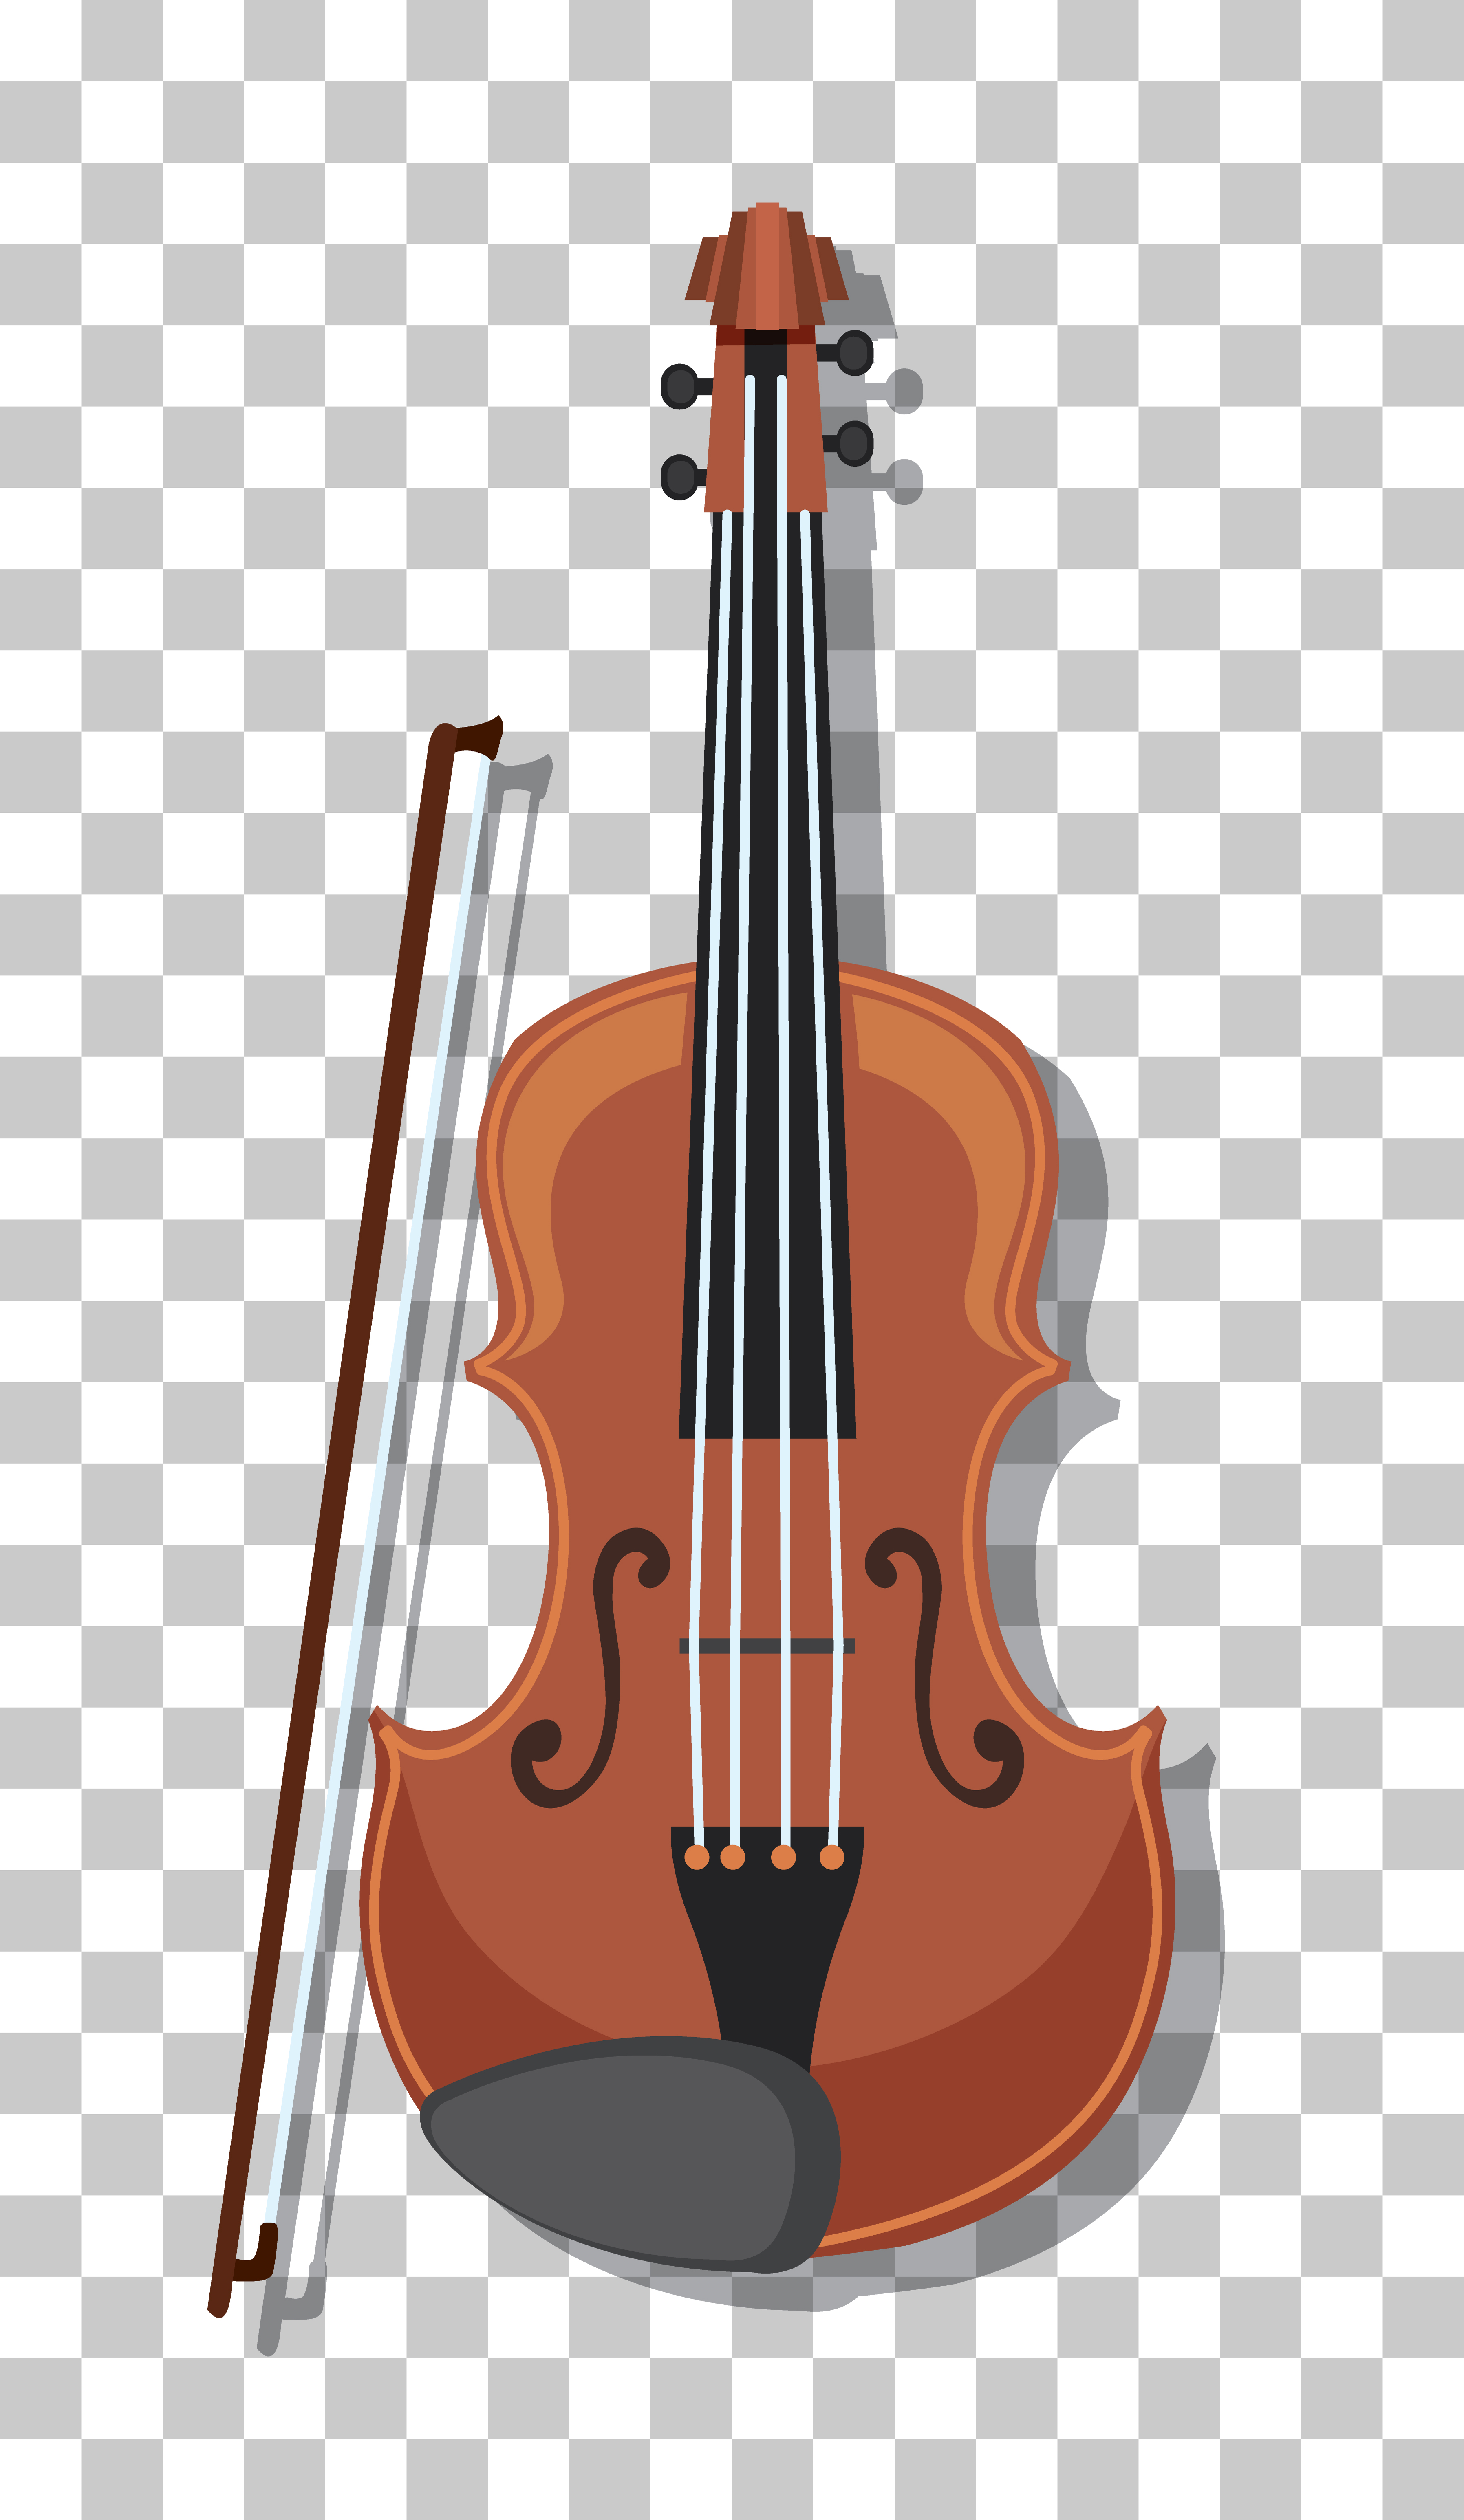 Violin Vector Art, Icons, and Graphics for Free Download